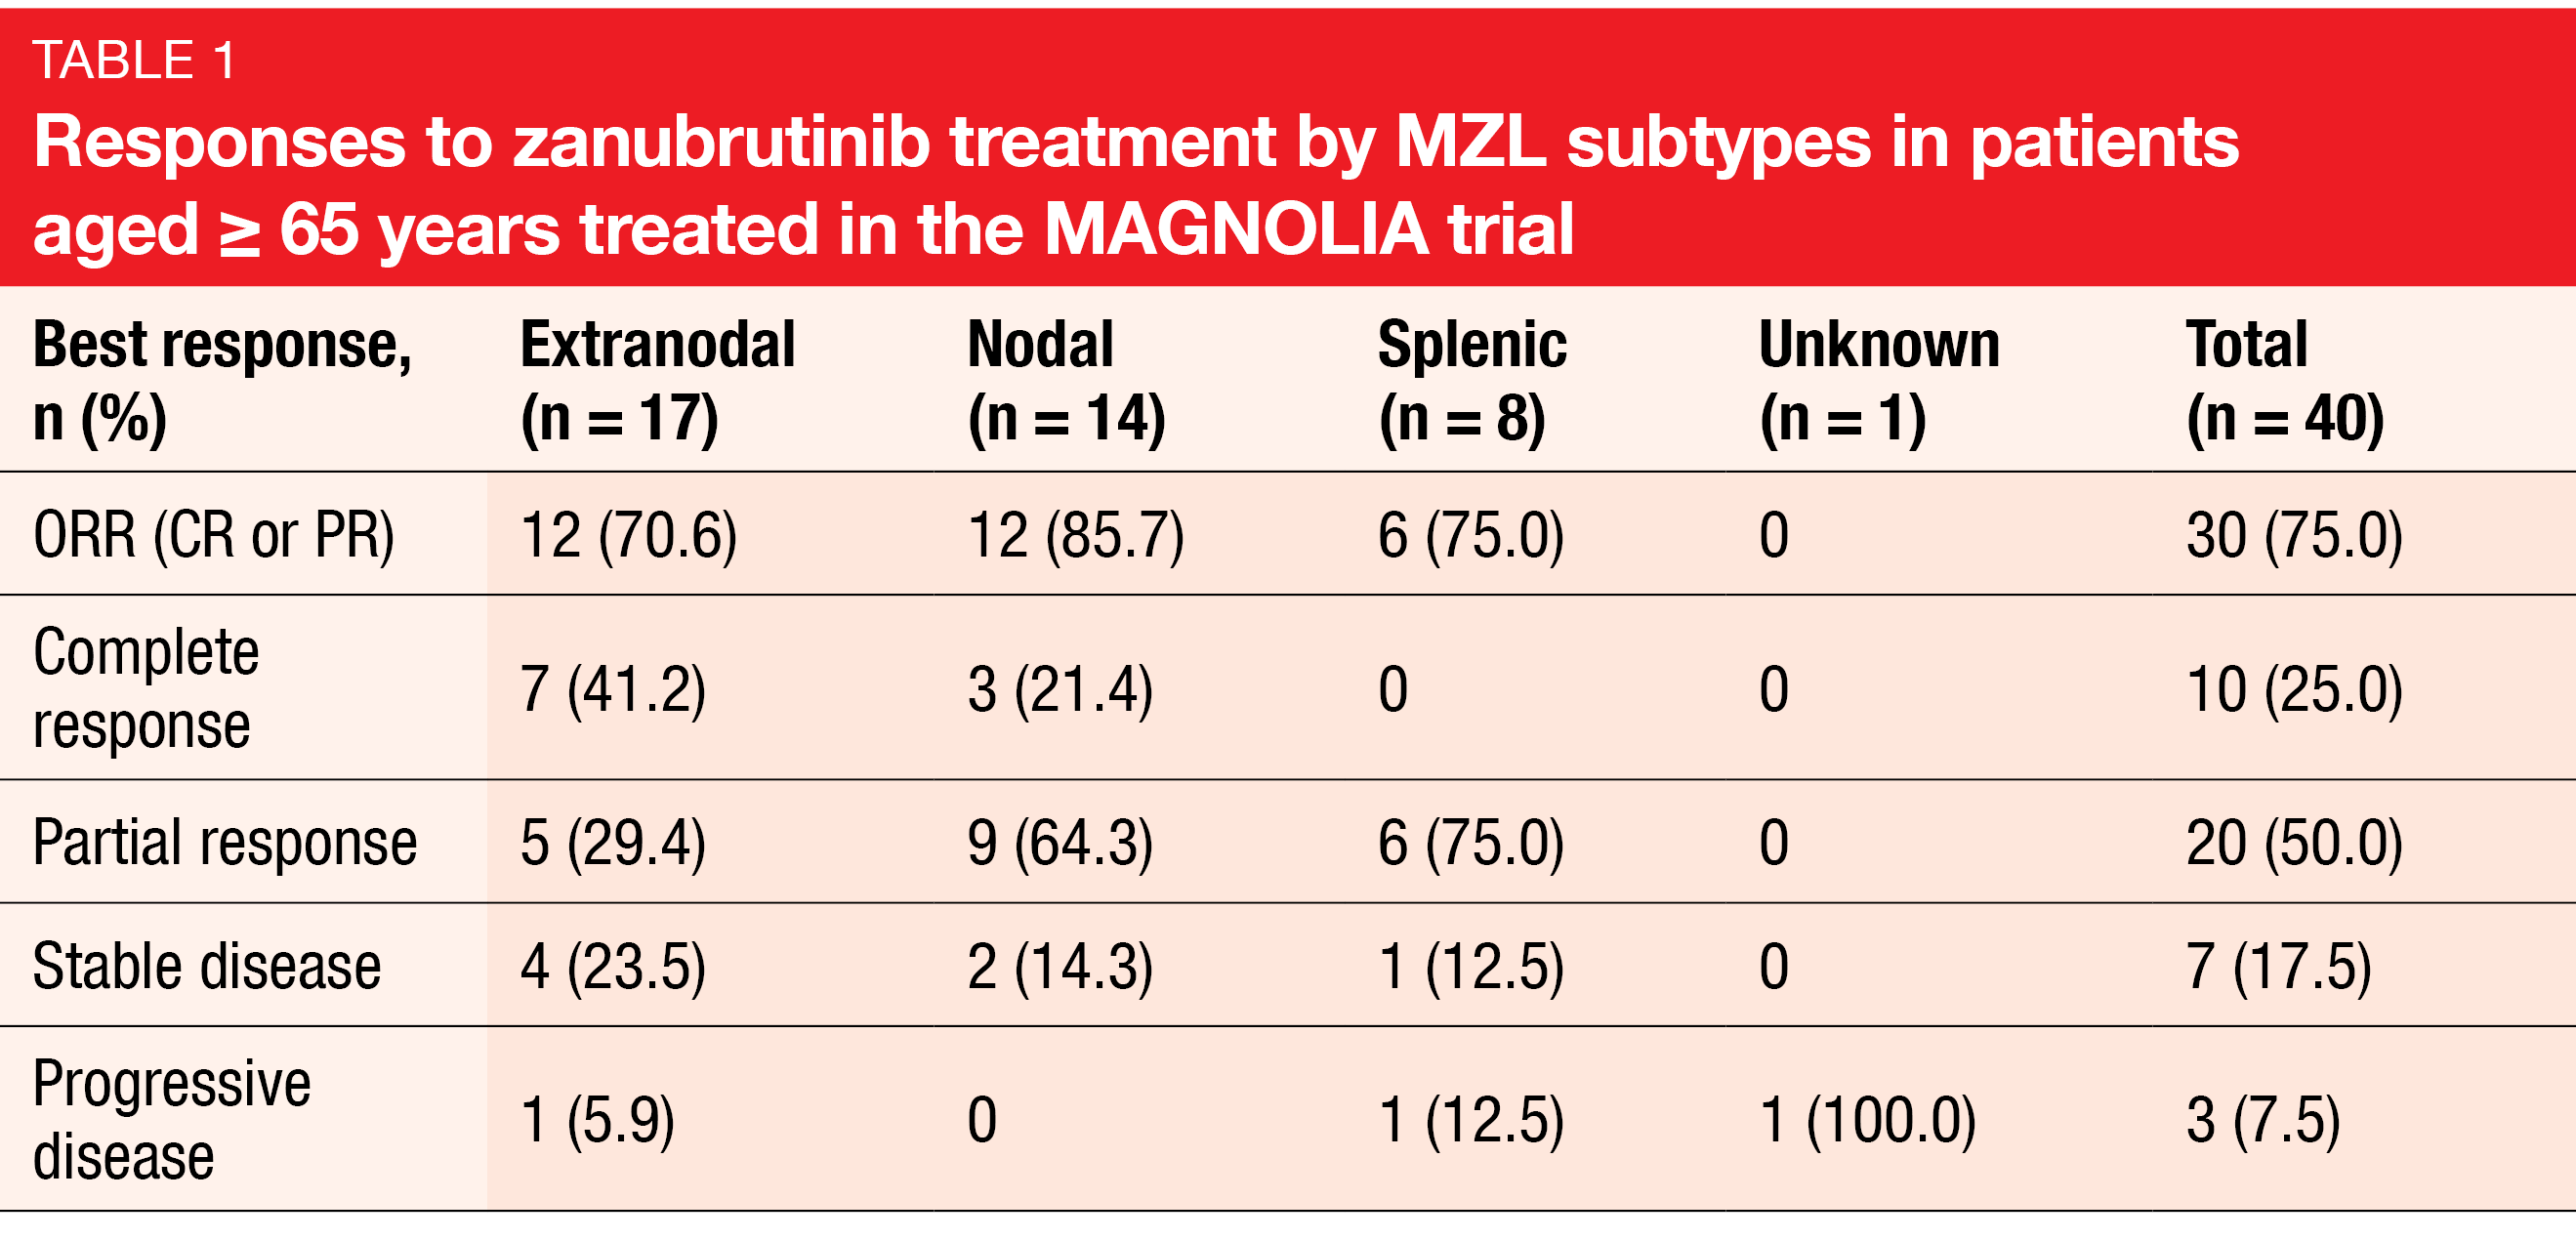 Table 1 Responses to zanubrutinib treatment by MZL subtypes in patients aged ≥ 65 years treated in the MAGNOLIA trial